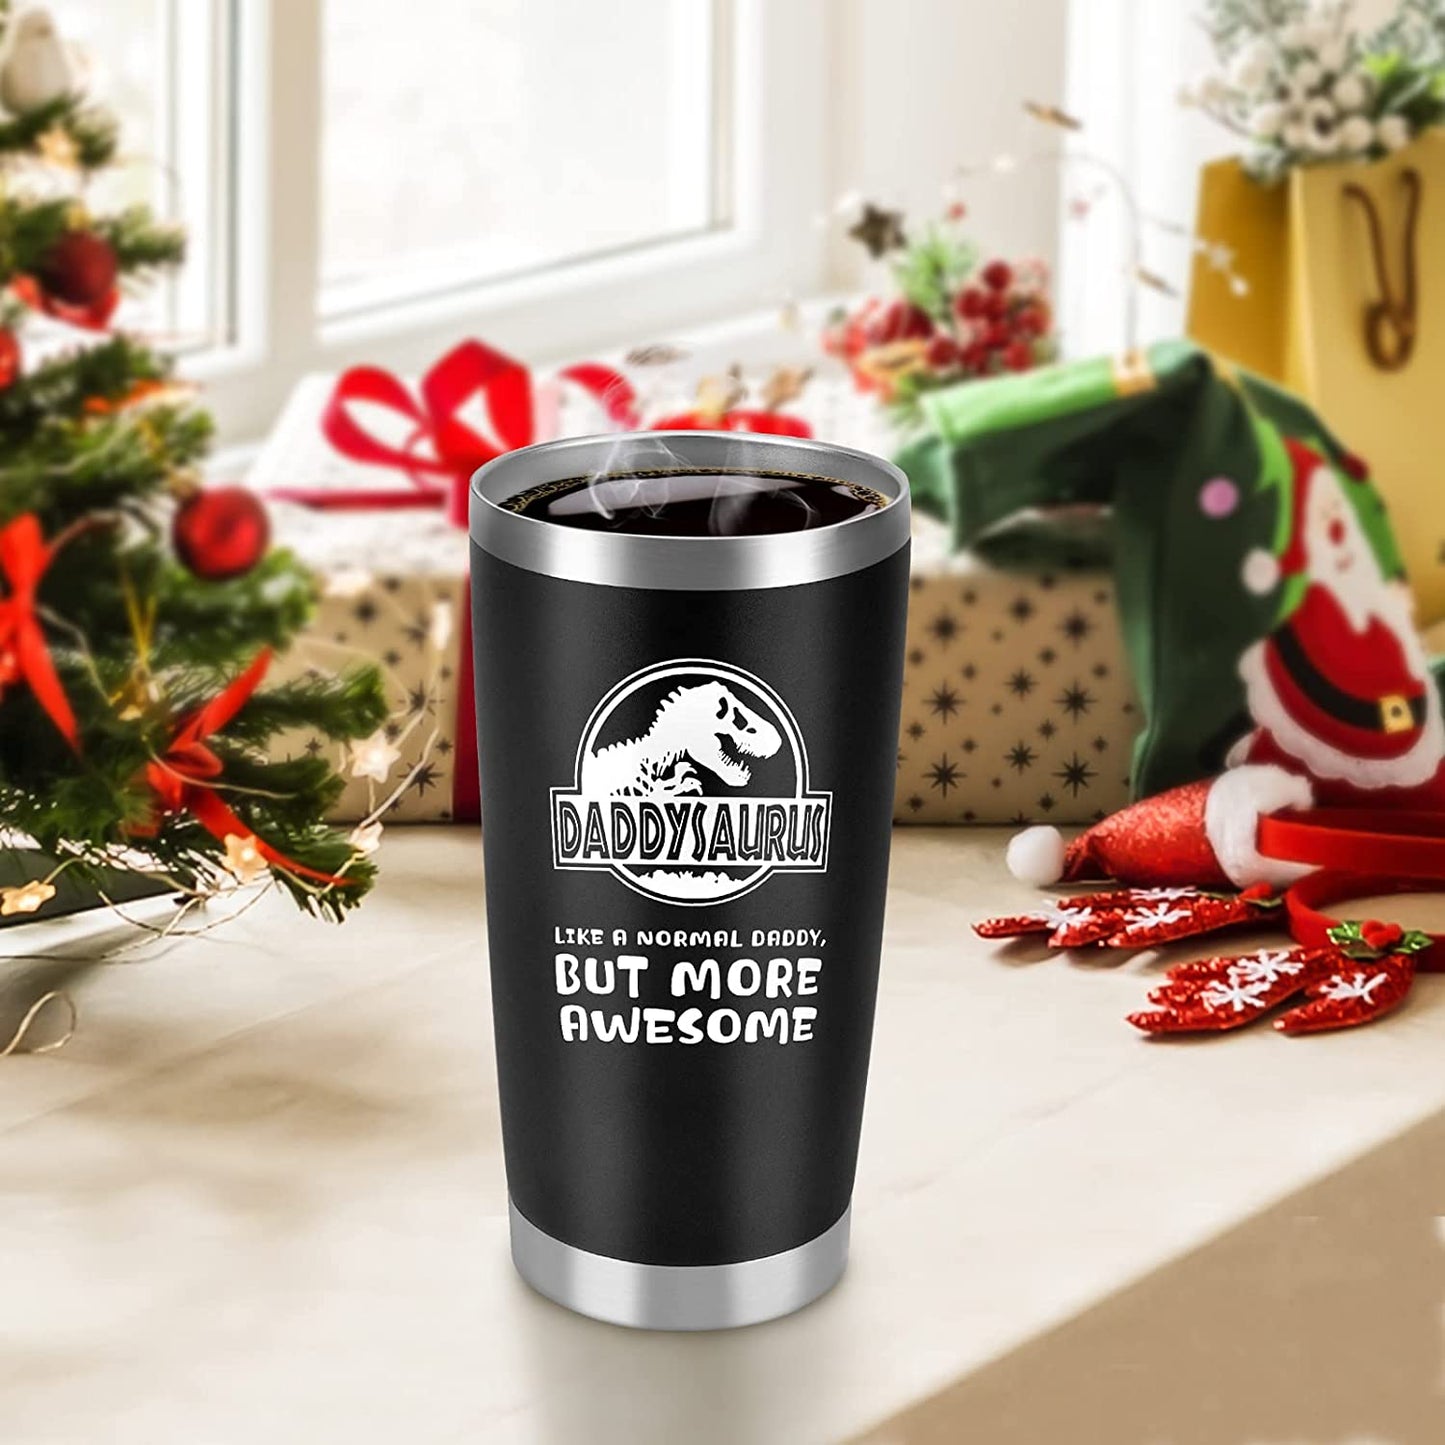 Gifts for Men Father Dad, 20 OZ Wine Tumbler for Him Boyfriend Fiancé, Christmas Stocking Stuffers Valentines Day Awesome Gifts From Daughter or Son Wife for Husband Festival Birthday Funny Presents